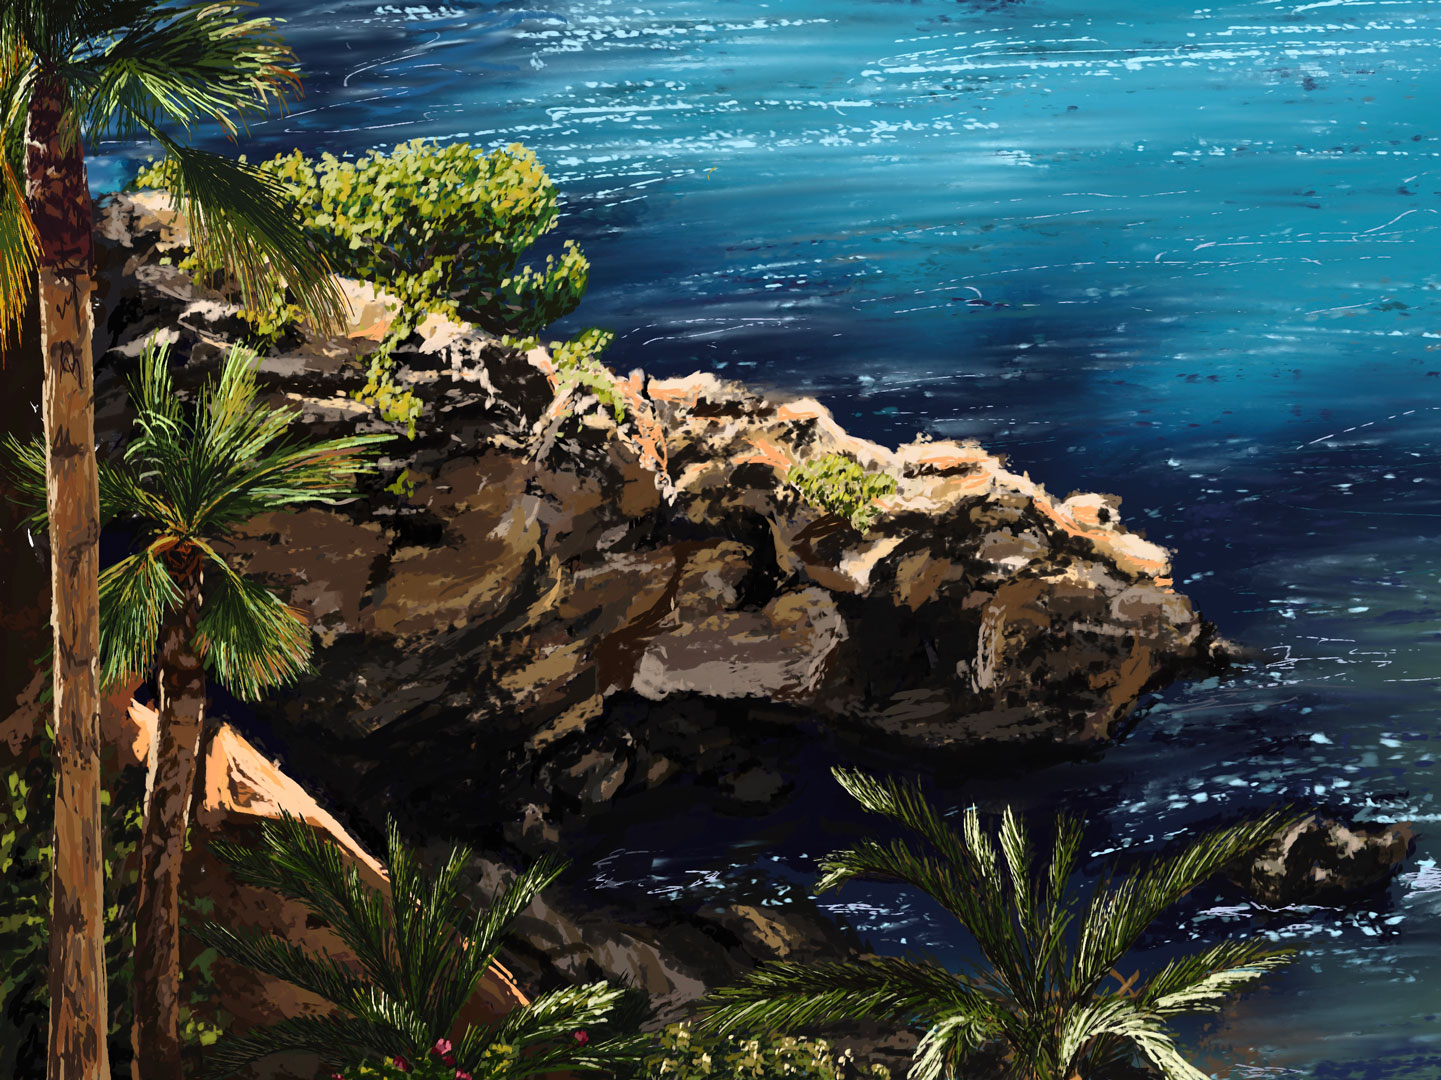 A digital environmental study of palm trees, rocks, and the blue waters of the coast of Moraira in Spain.